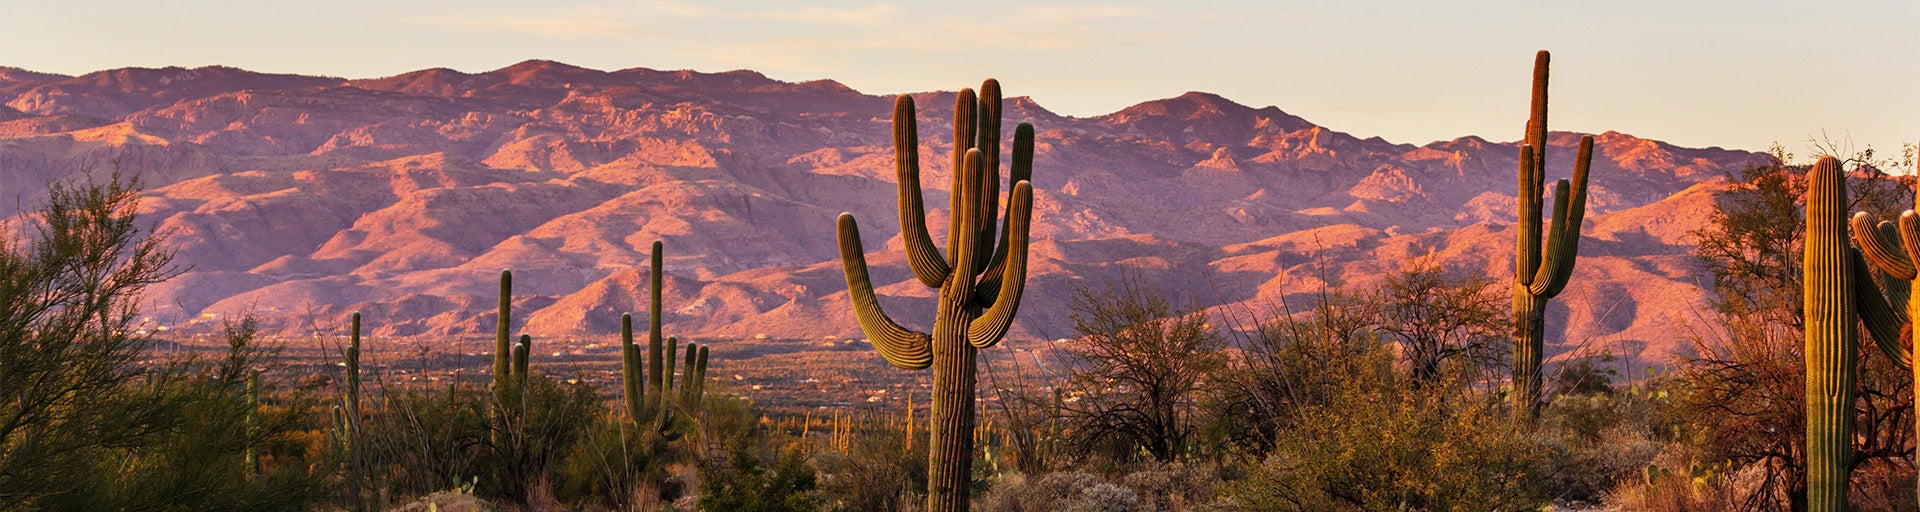 Cacti and pink sunset hitting the mountains in the Saguaro National Park.